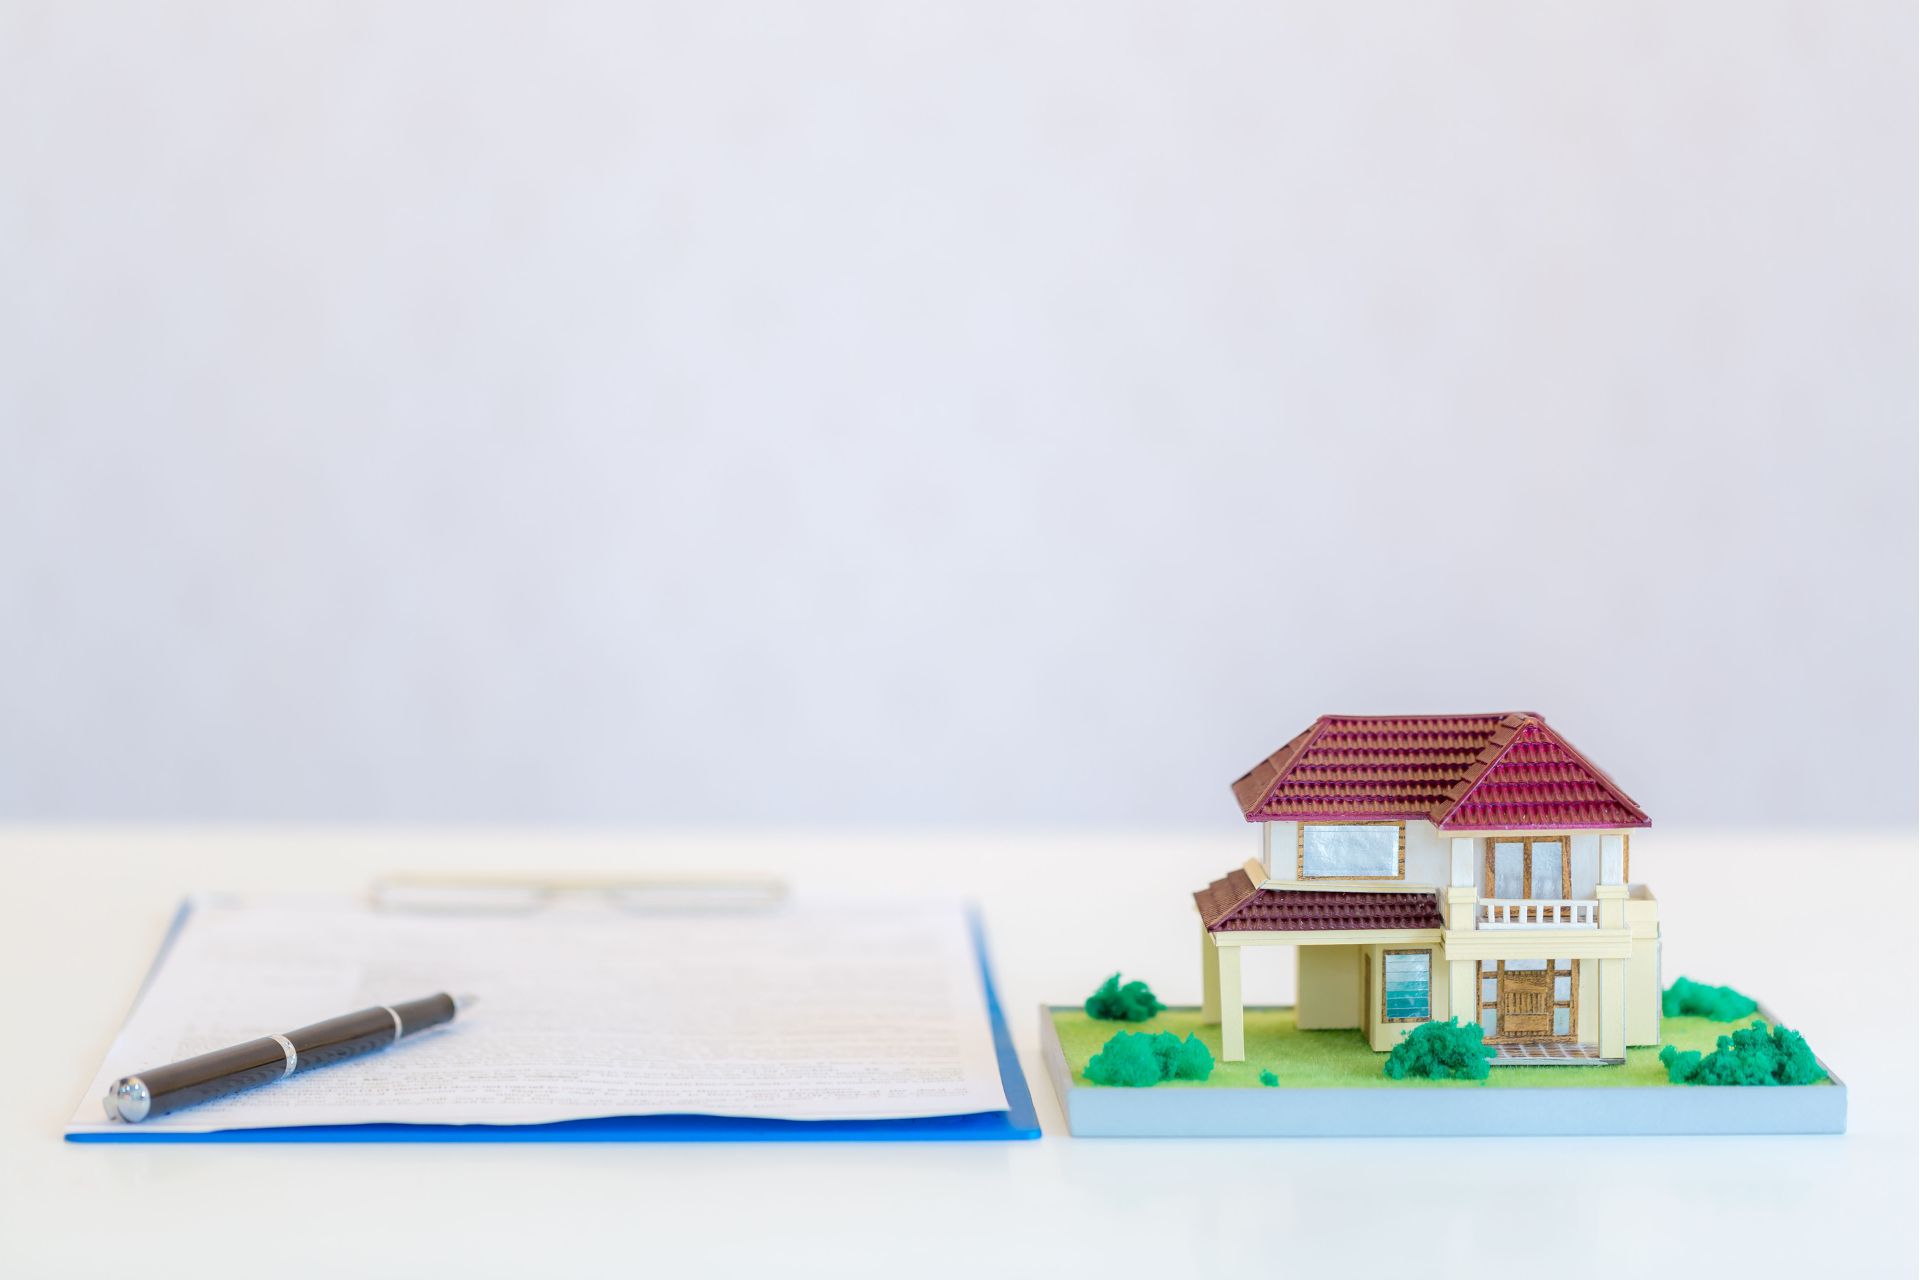 A pen rests atop a document on a blue clipboard, with a miniature house model featuring a red roof and a green yard placed to the right, symbolizing the concept of a 1031 exchange in real estate investment.